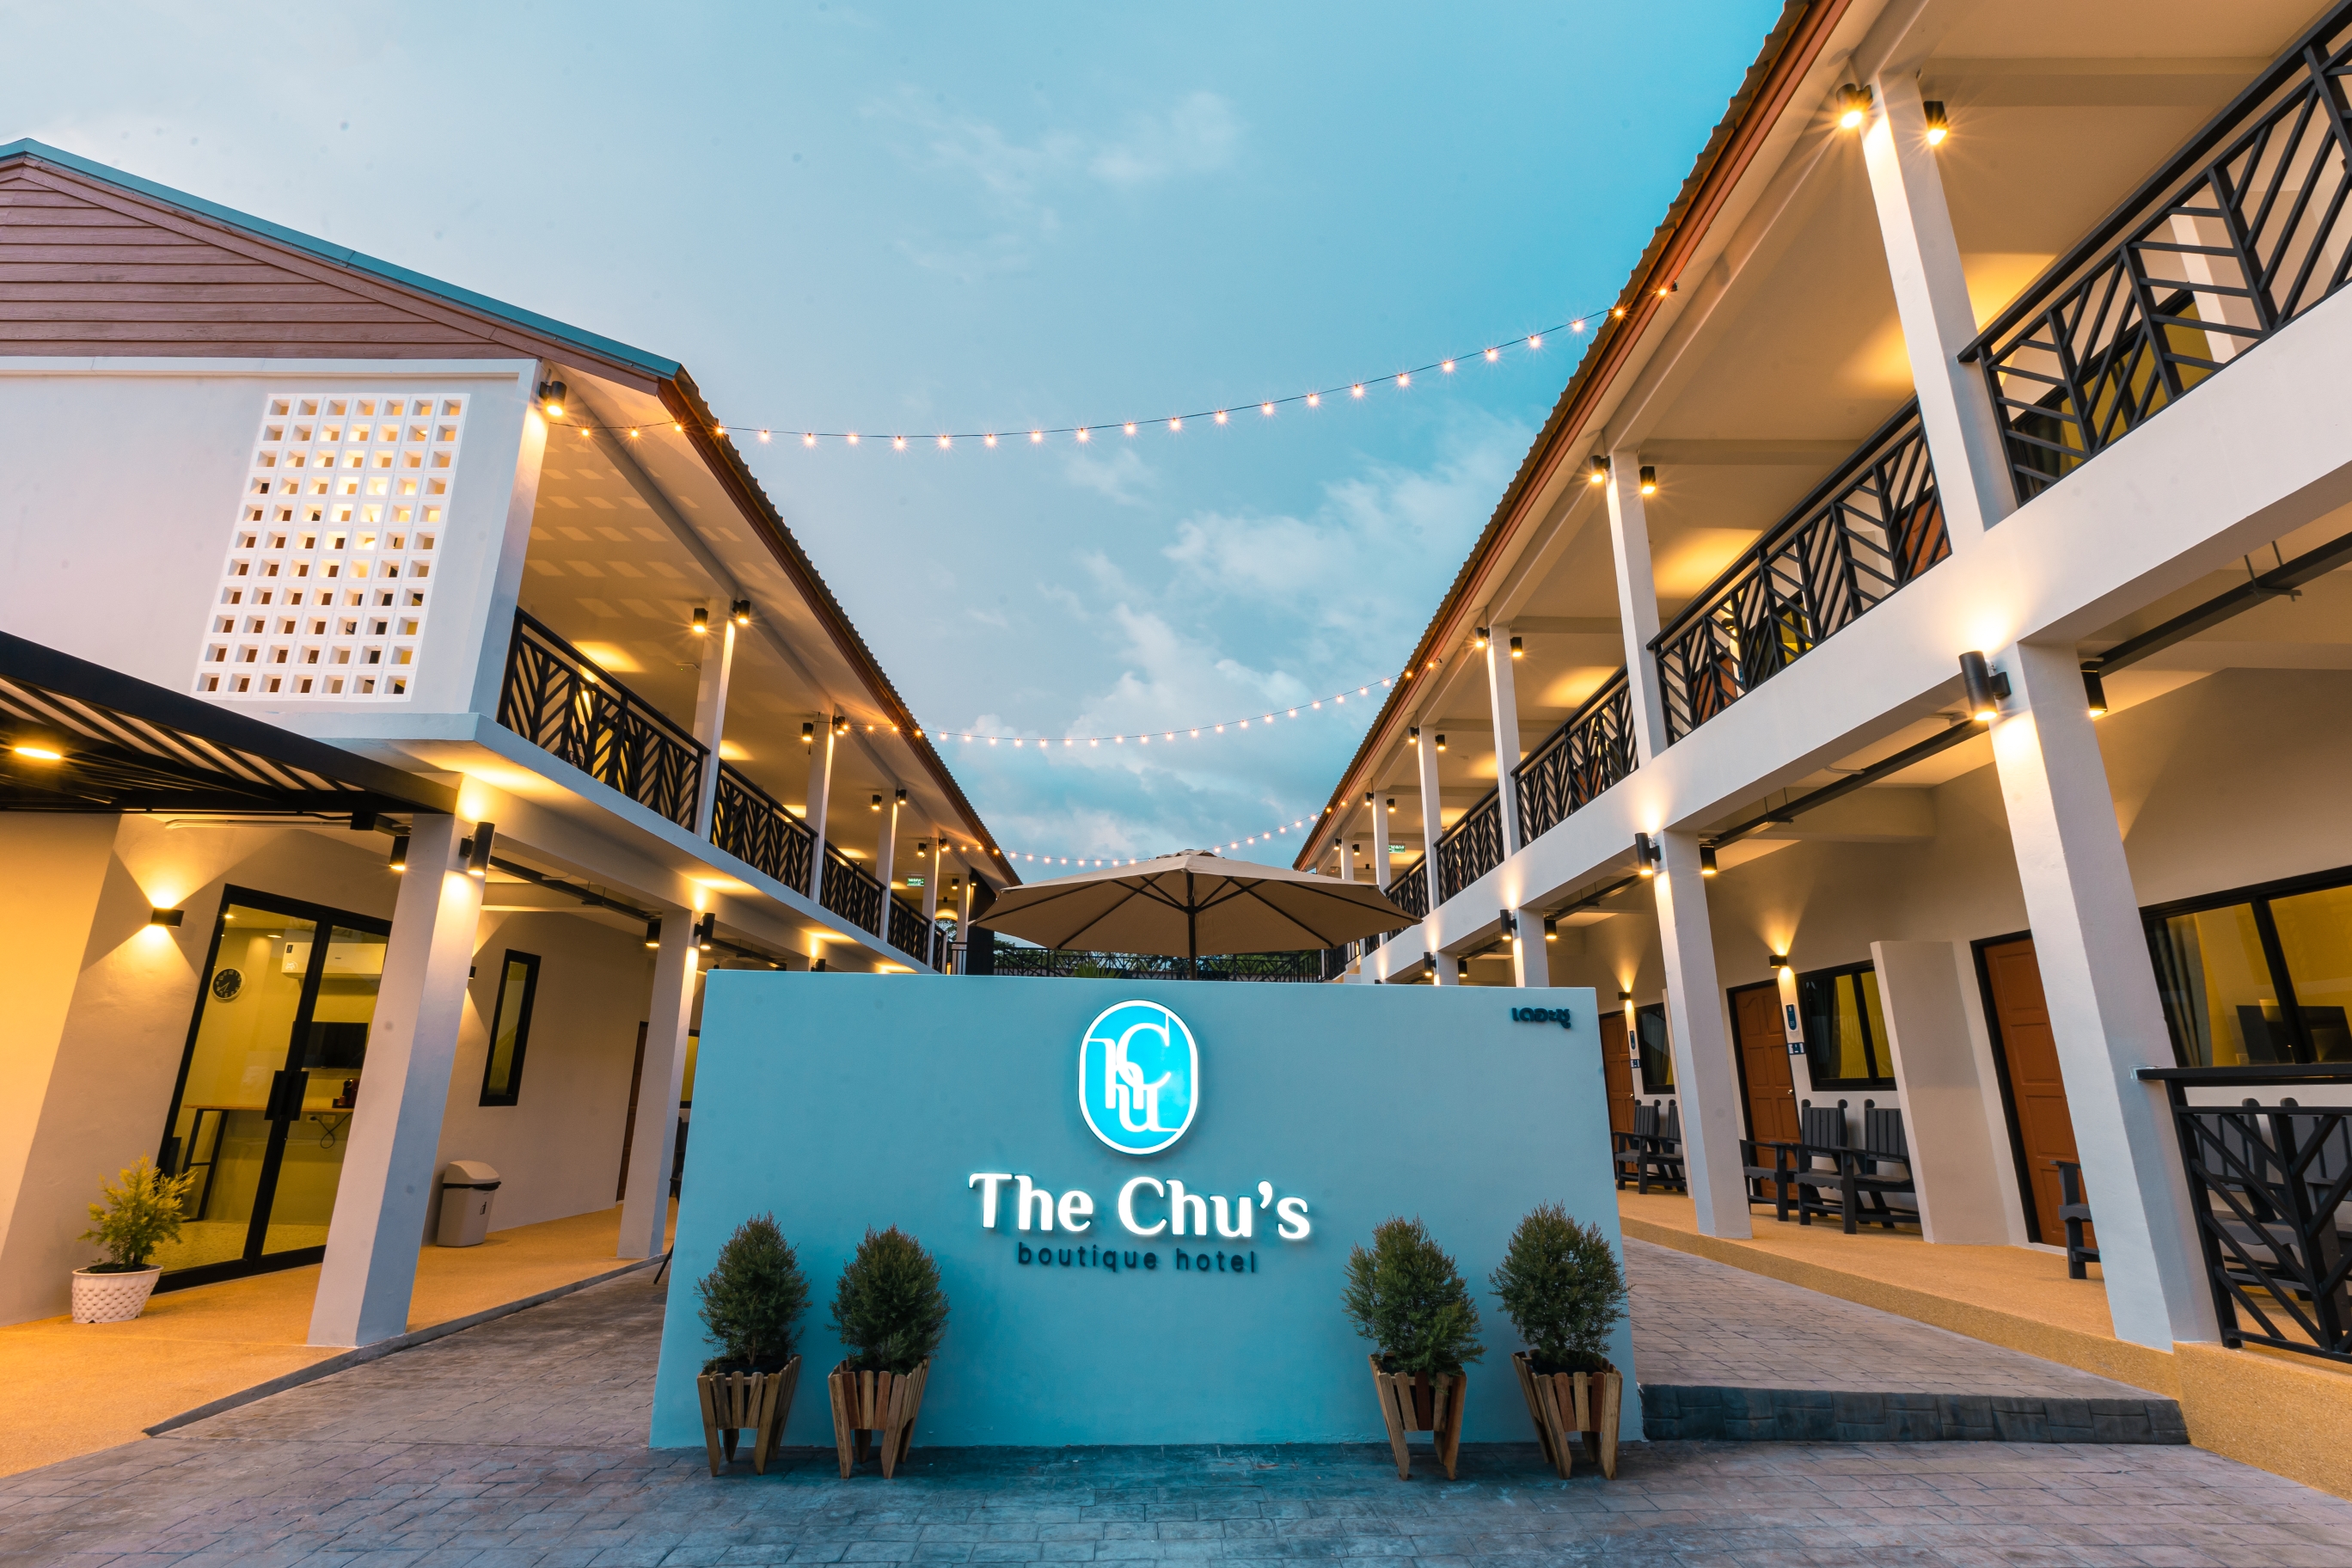 The Chu’s boutique hotel